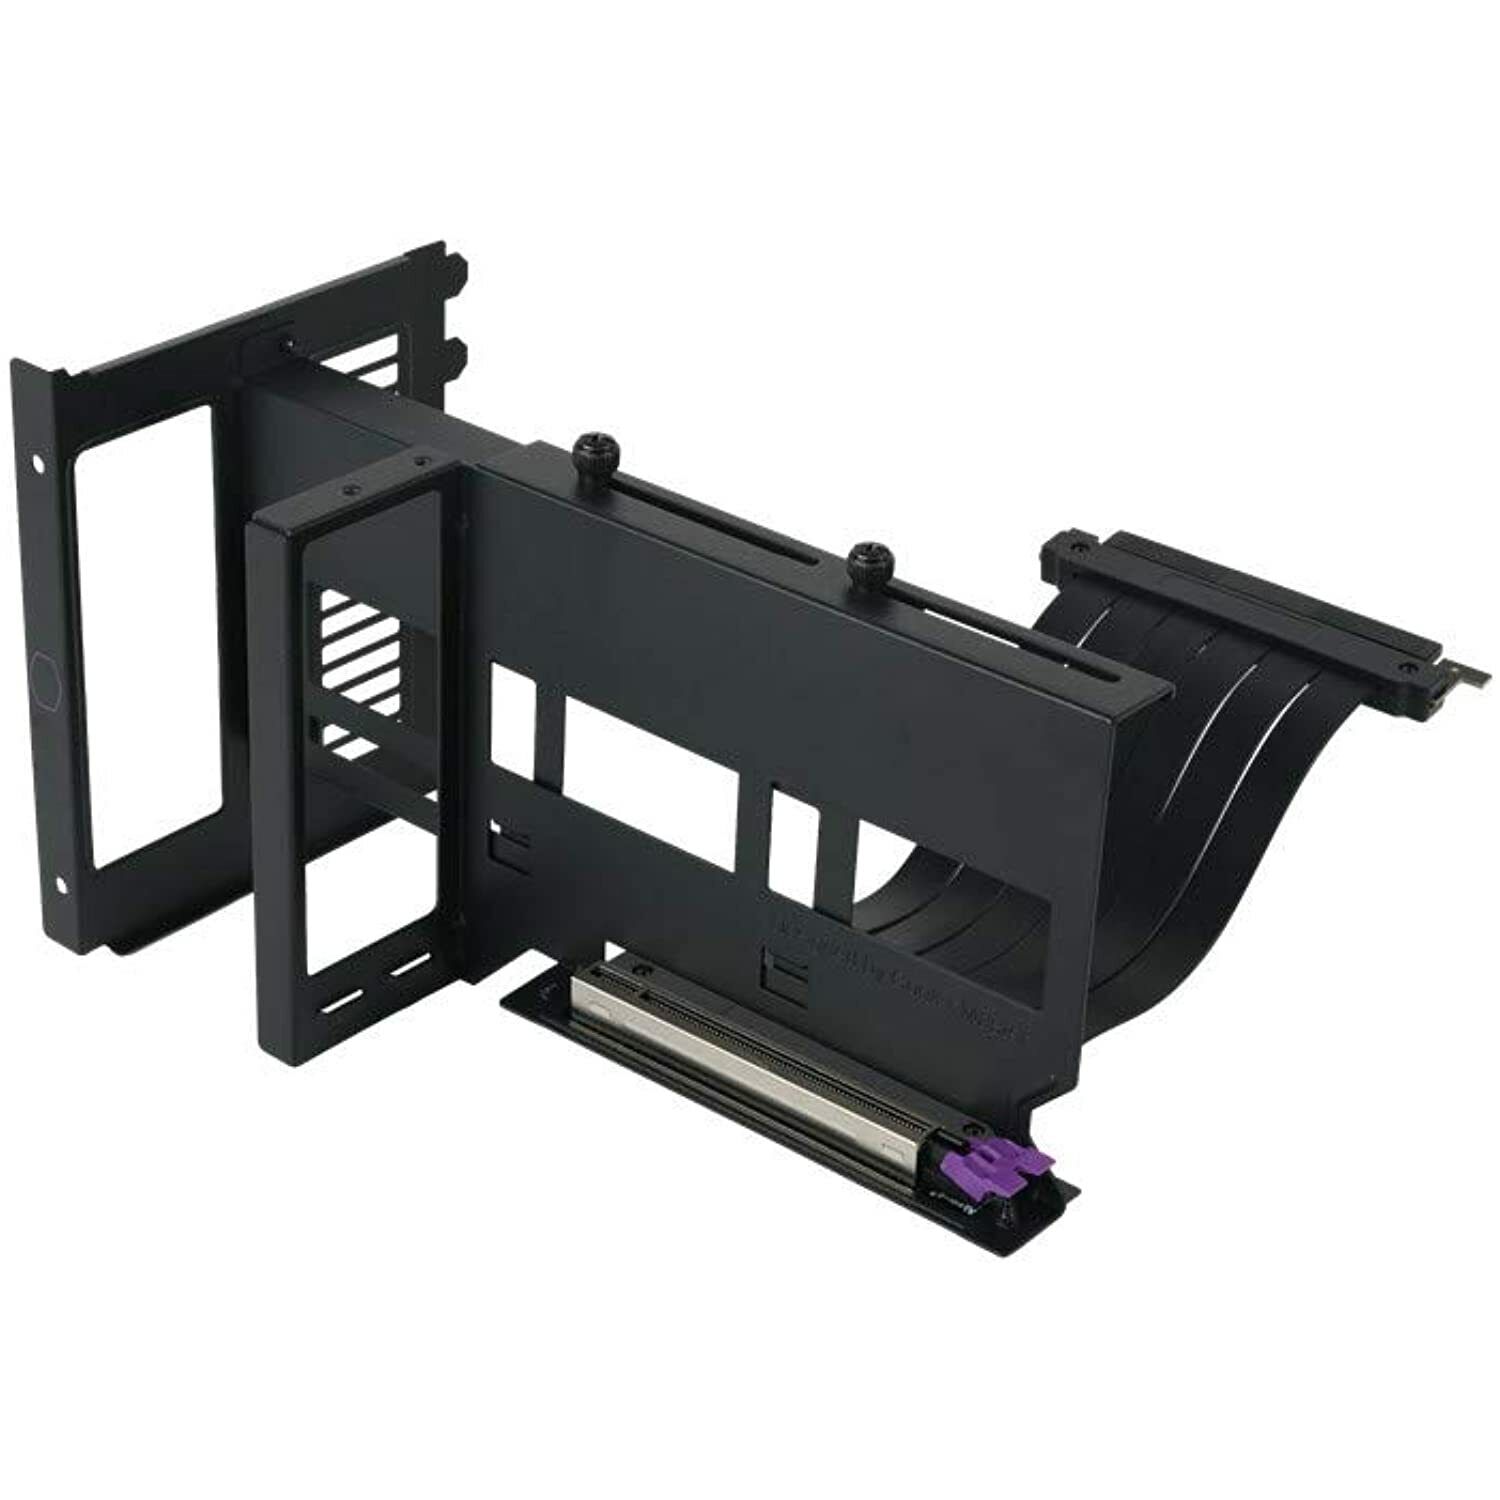 Cooler Master MasterAccessory Vertical Graphics Card Holder Kit Version 2 with …